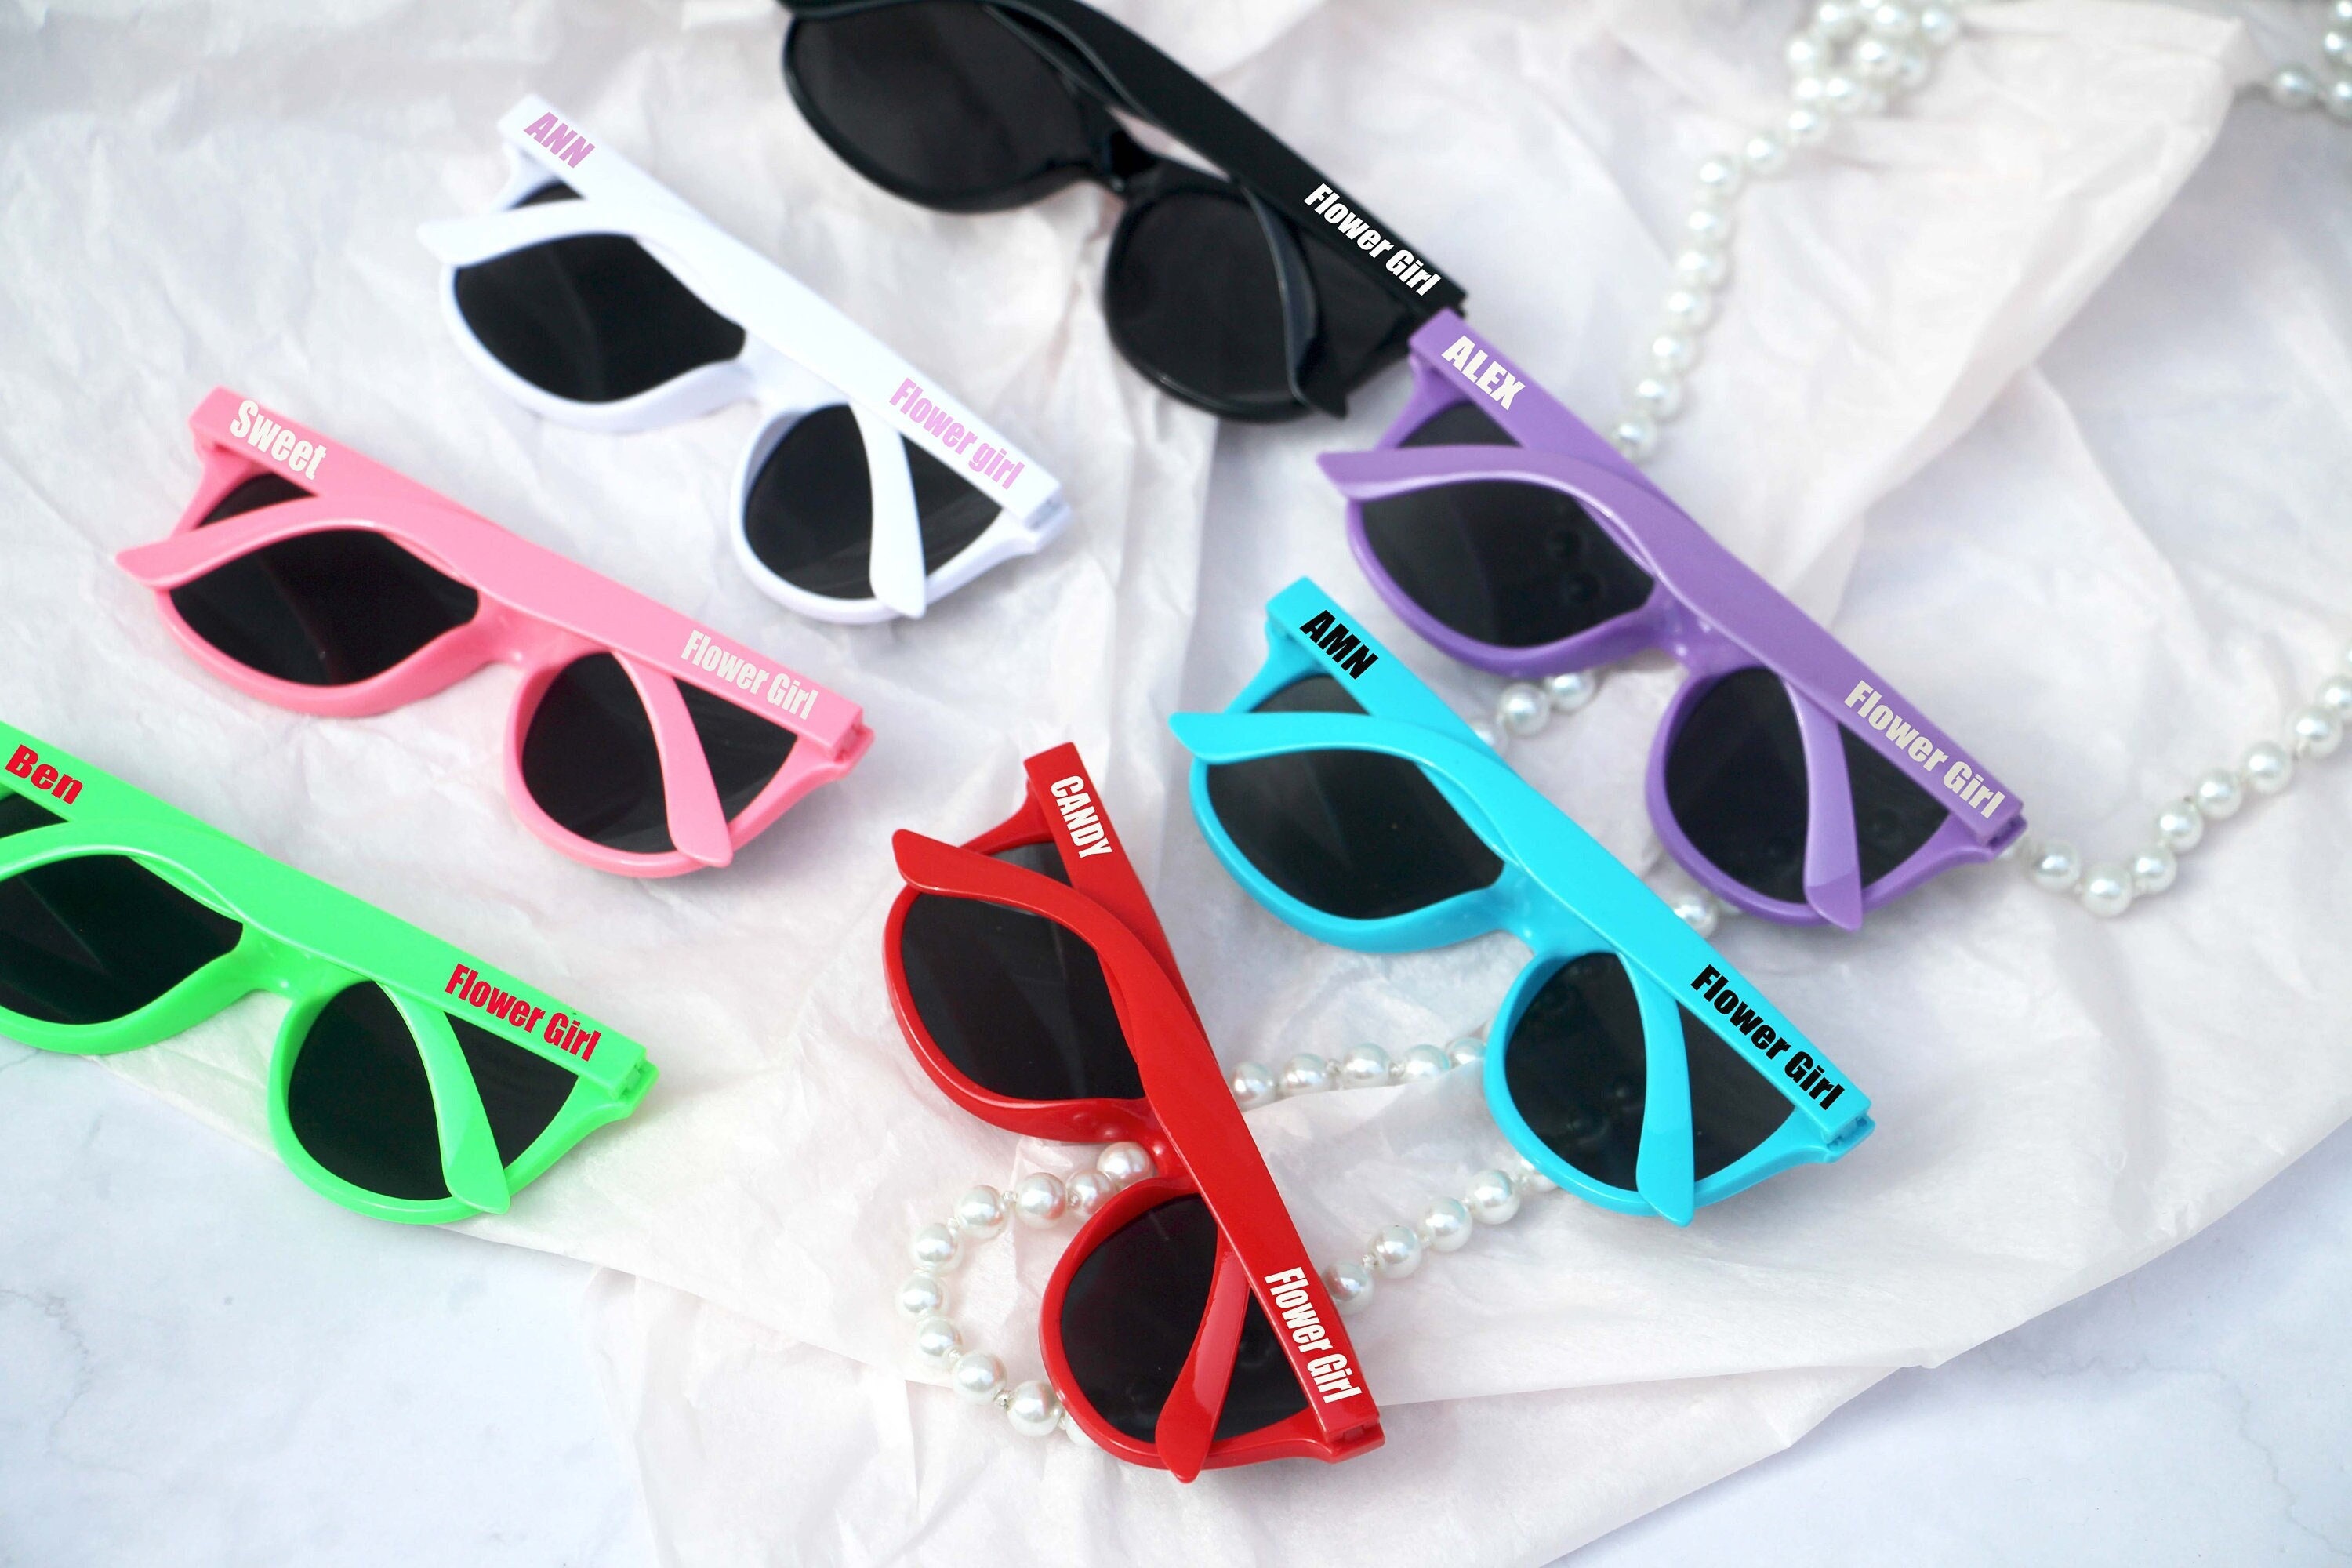 Kids Iconic Sunglasses with your logo